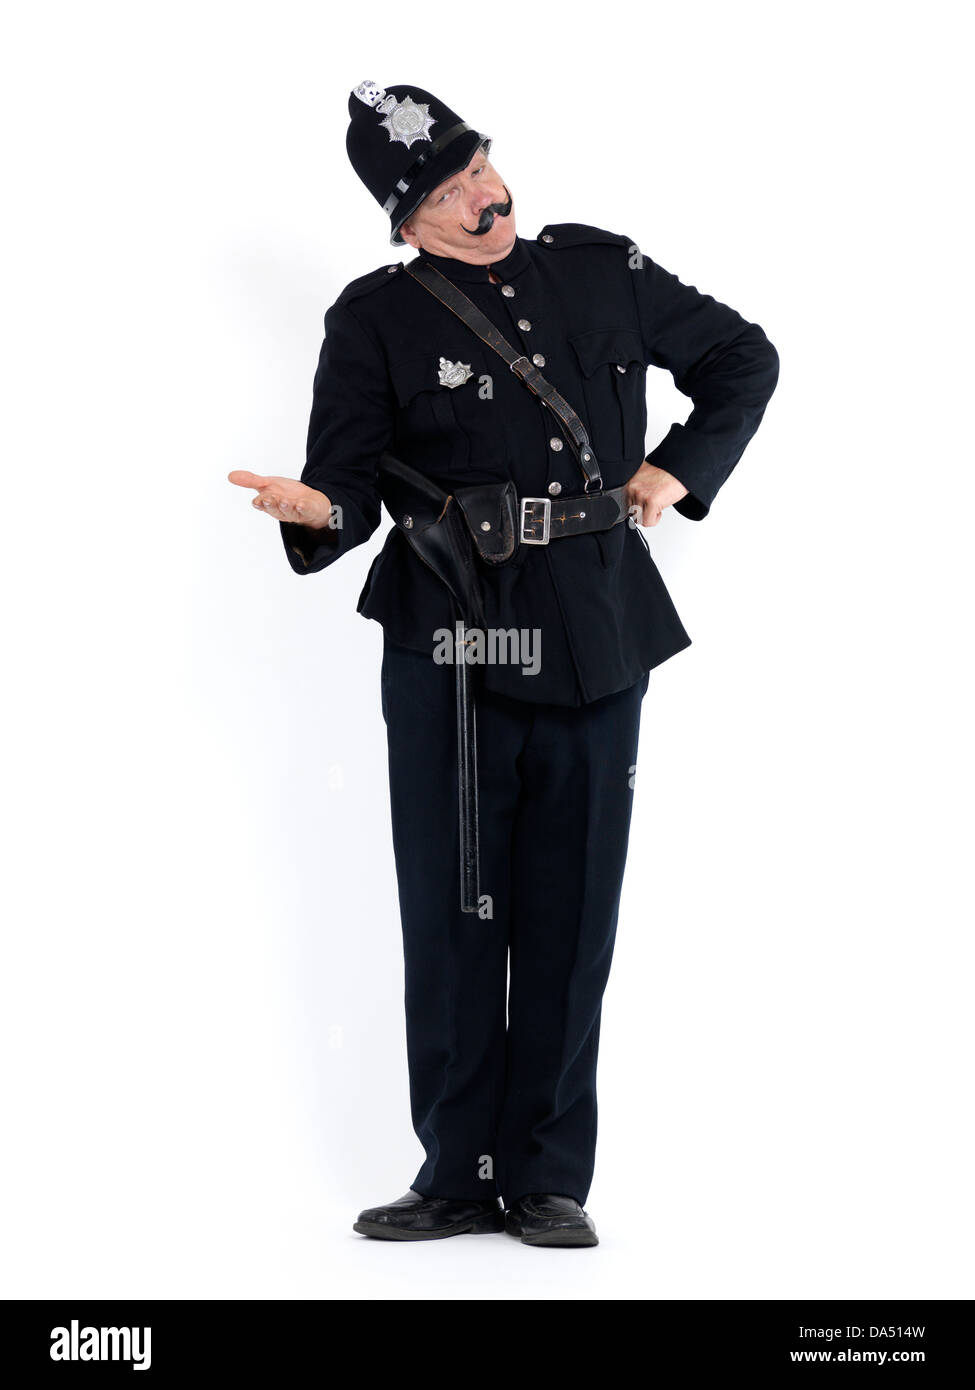 License and prints at MaximImages.com - Humorous portrait of a Keystone Cop, vintage police officer expressing authority, Isolated on white background Stock Photo